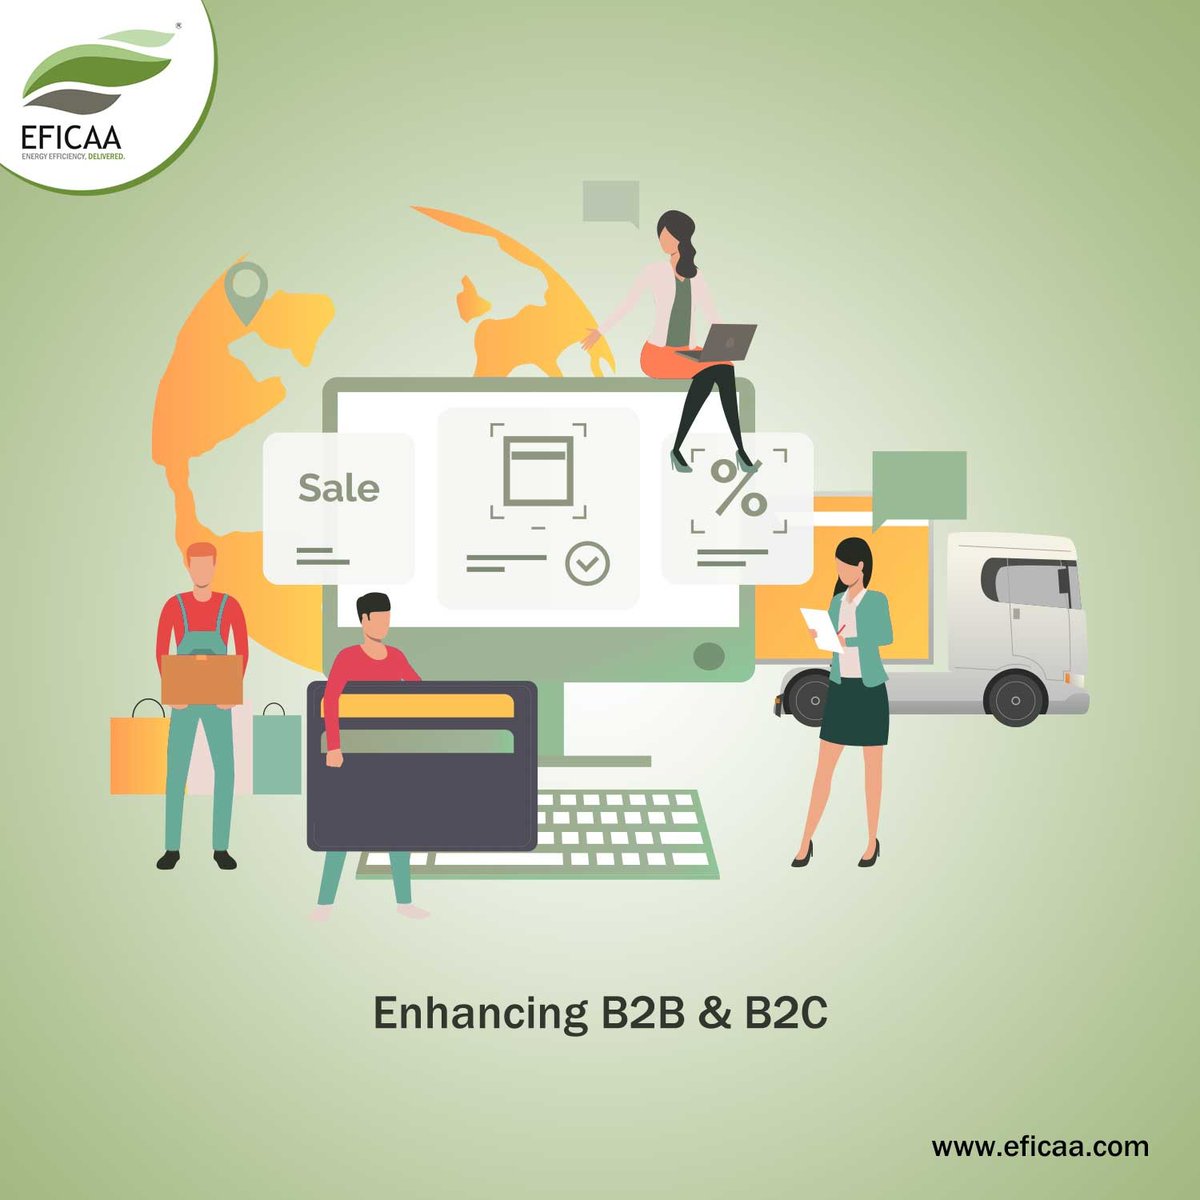 Eficaa caters to both B2B and B2C segments with tailored solutions. Embrace efficiency with our advanced offerings today.

#eficaa #smartsolutions #hyderabad #somajiguda #eficaa #tailoredsolutions #b2bsegment #b2csegment #advancedofferings #embraceefficiency